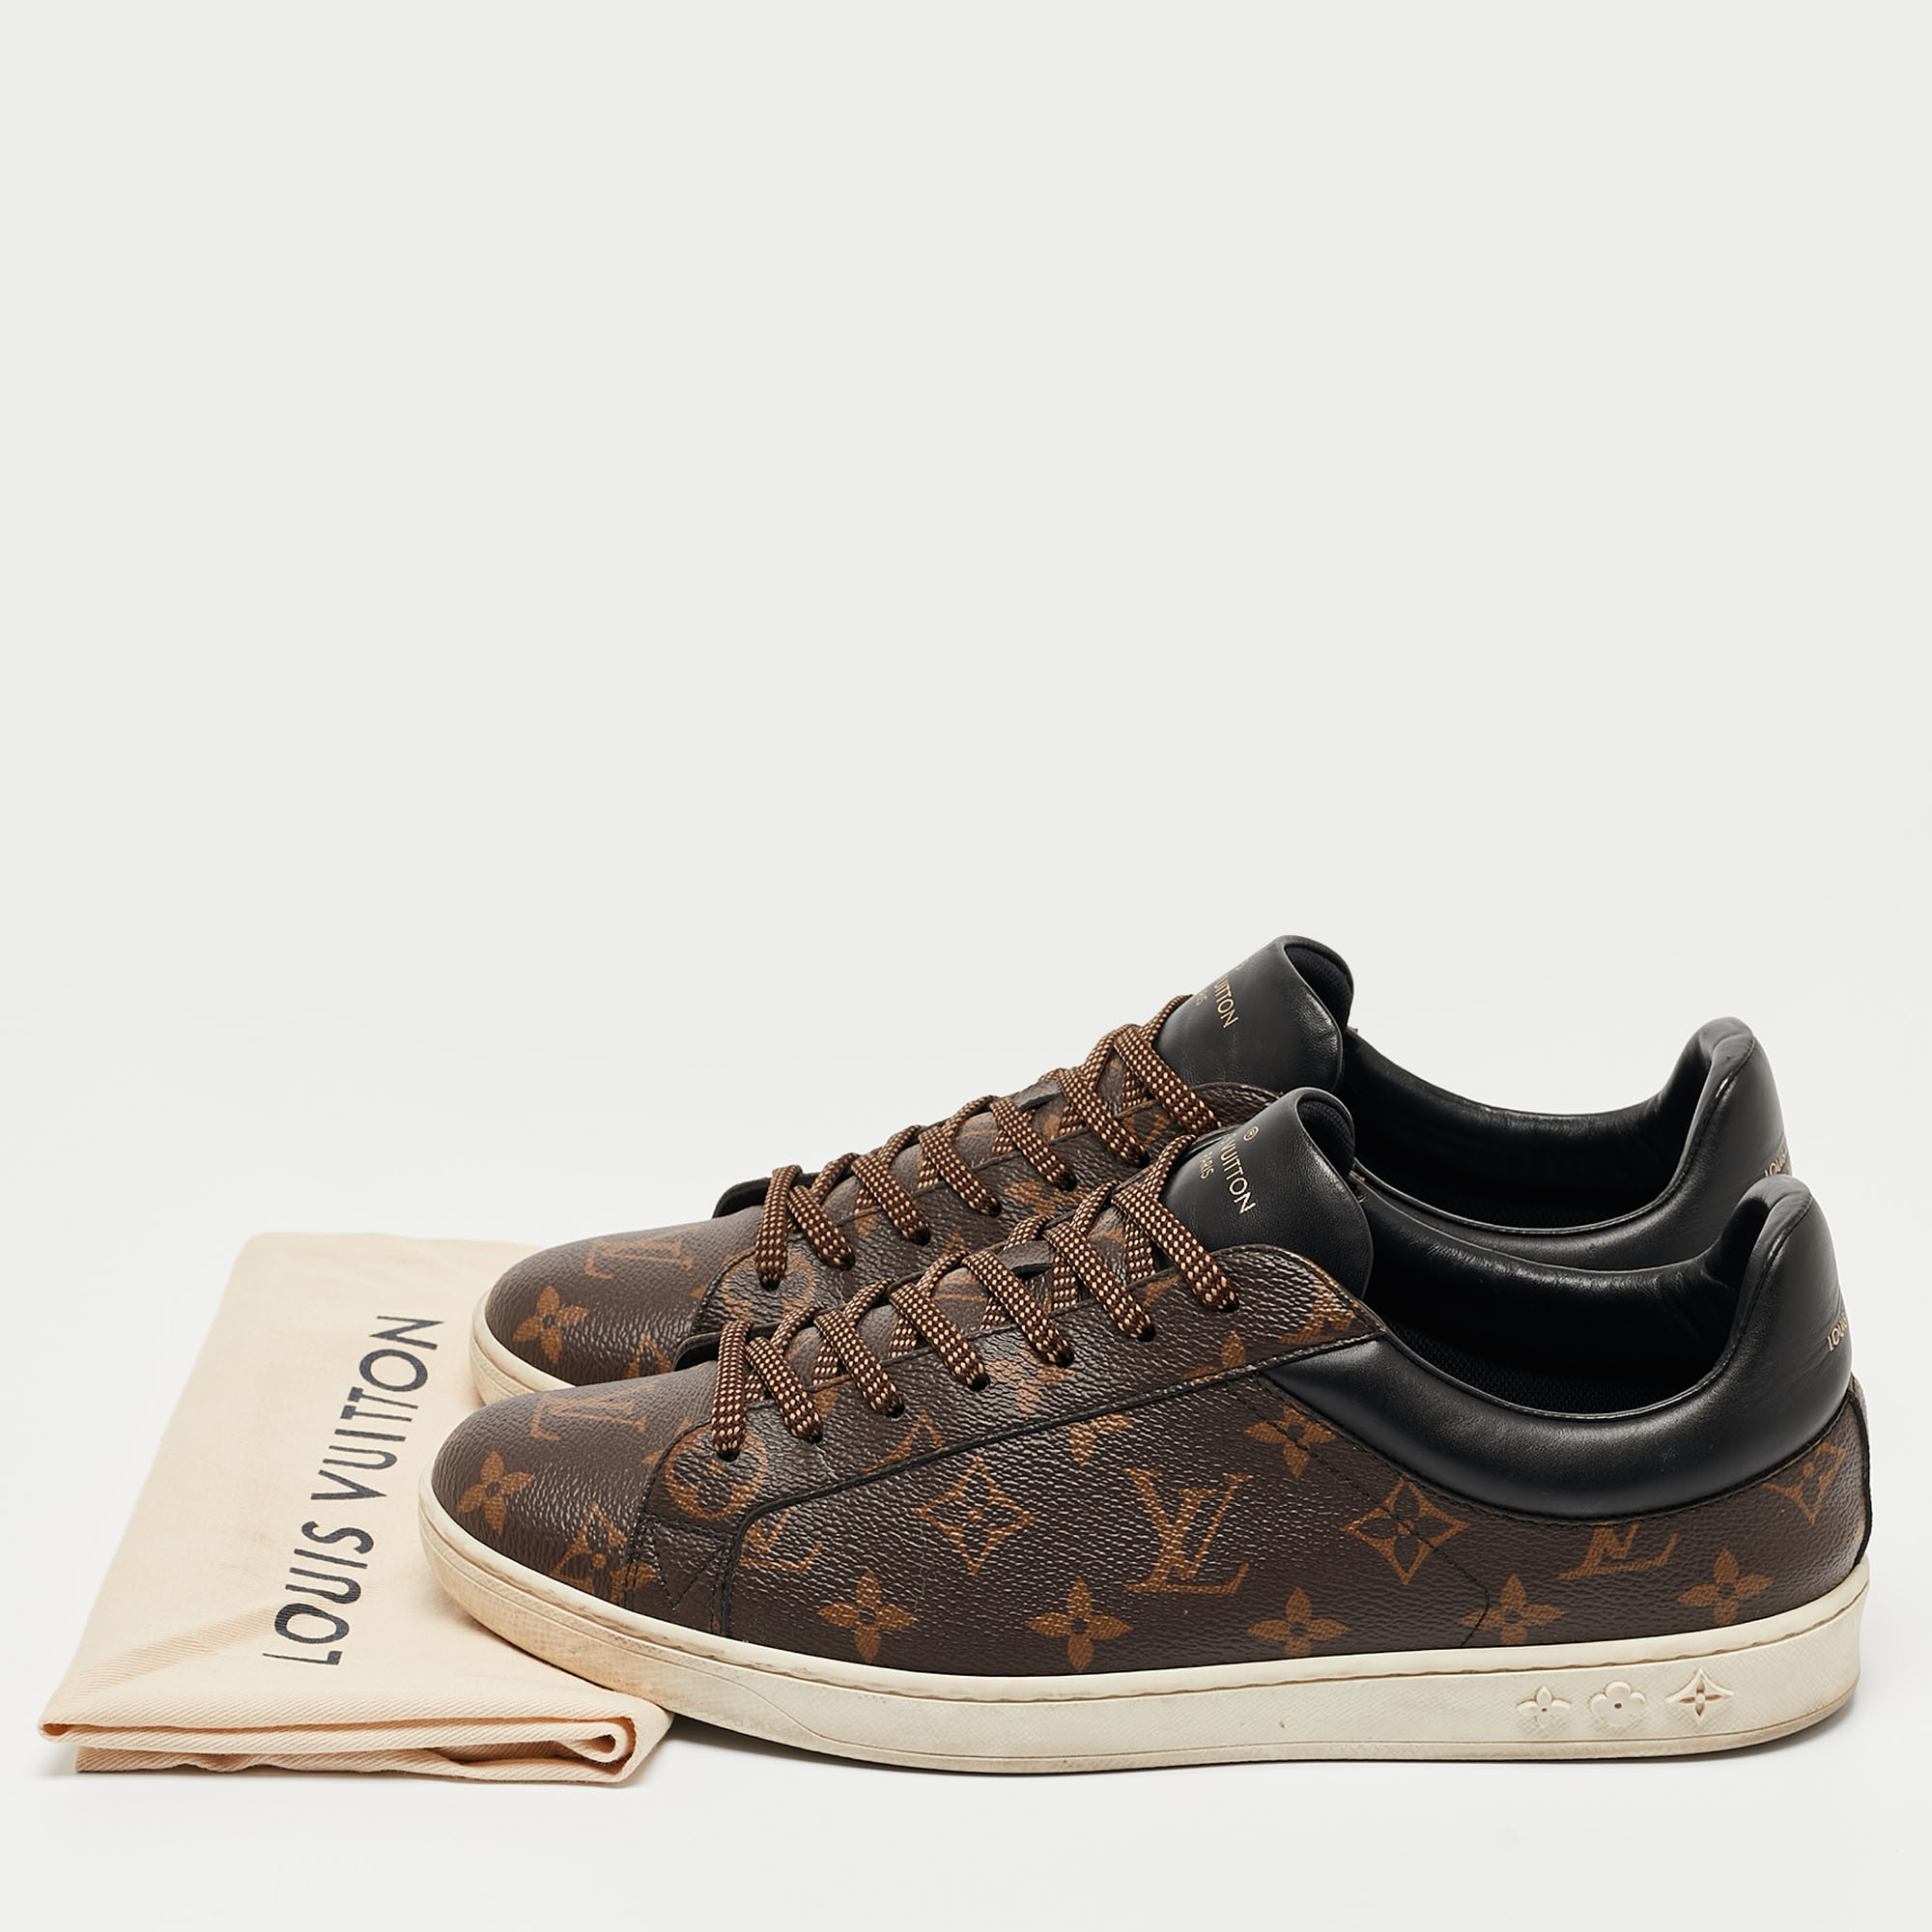 Louis Vuitton Brown Monogram Canvas And Leather Frontrow Low Top Sneakers Size 42